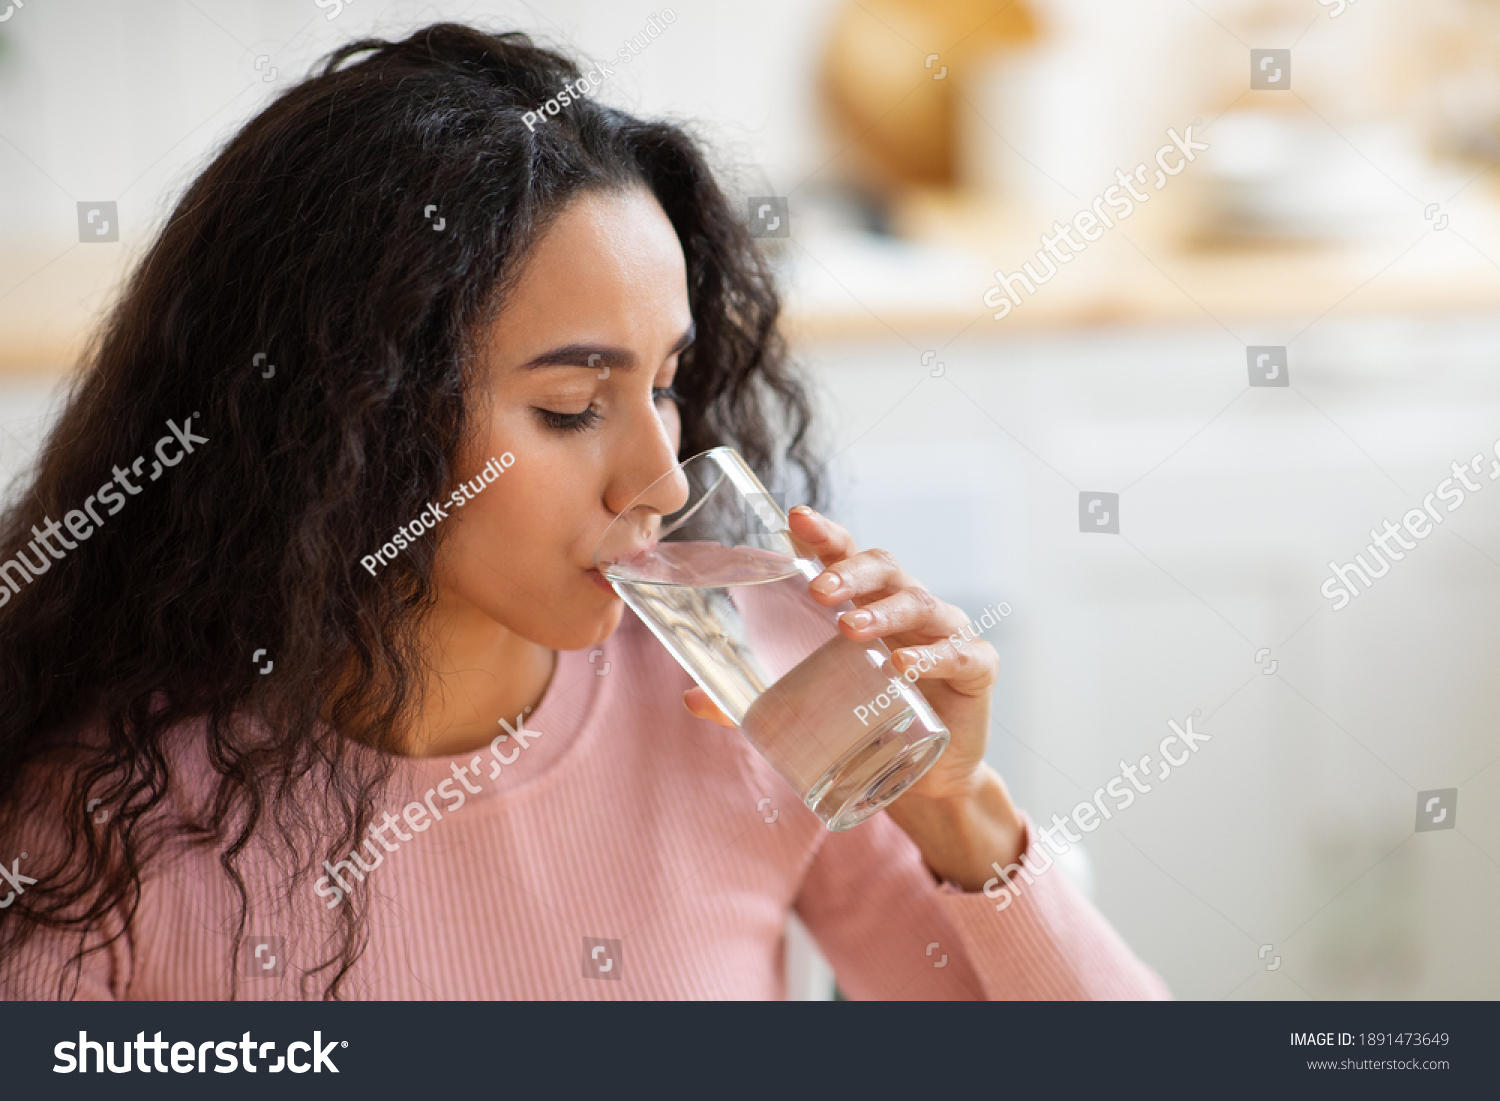 Healthy Liquid. Beautiful Brunette Woman Drinking Mineral Water From Glass In Kitchen, Thirsty Young Lady Enjoying Refreshing Drink At Home, Closeup Portrait With Selective Focus, Free Space #1891473649